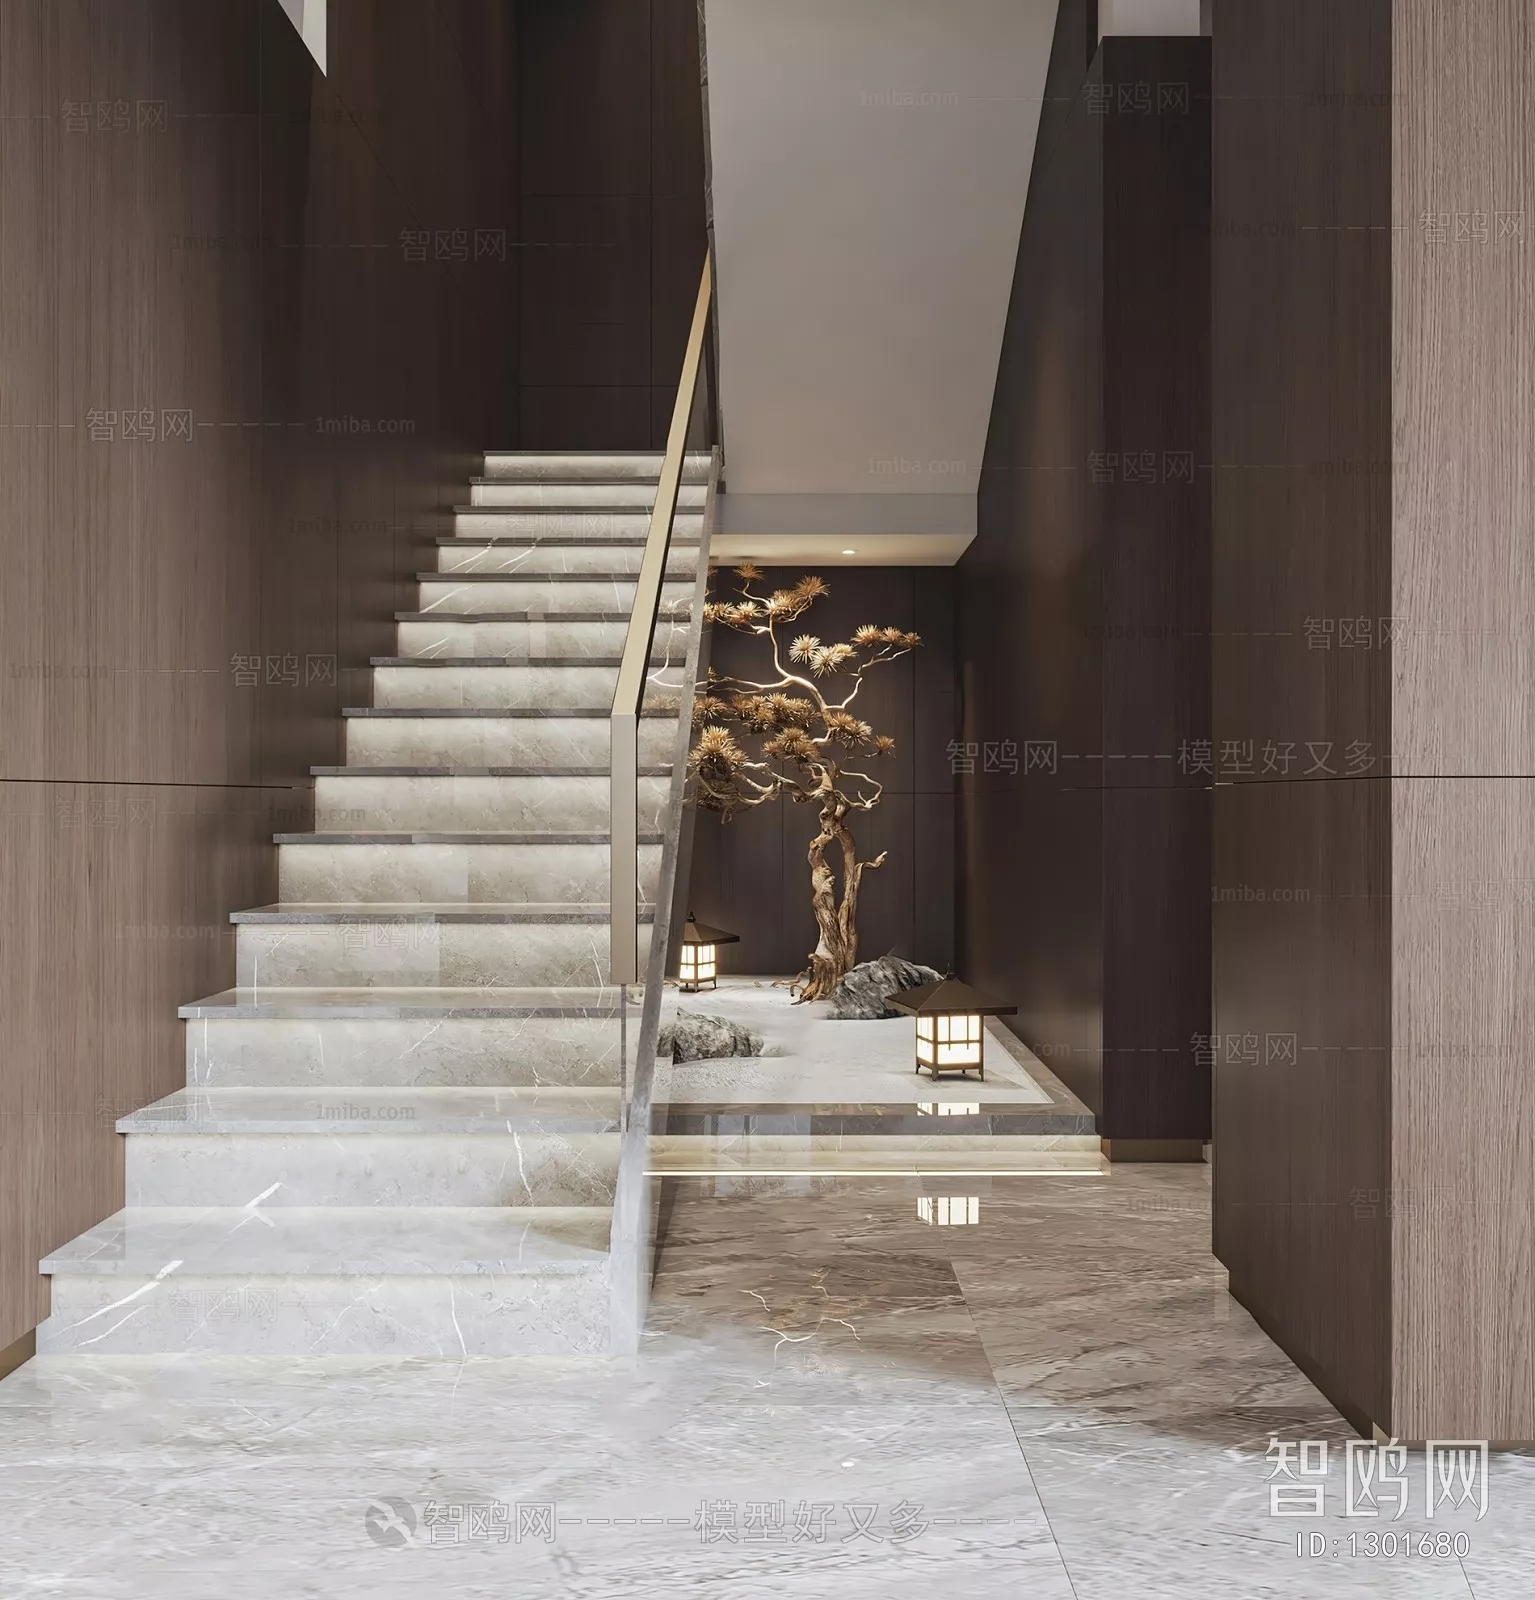 MODERN STAIR - SKETCHUP 3D MODEL - VRAY OR ENSCAPE - ID14176